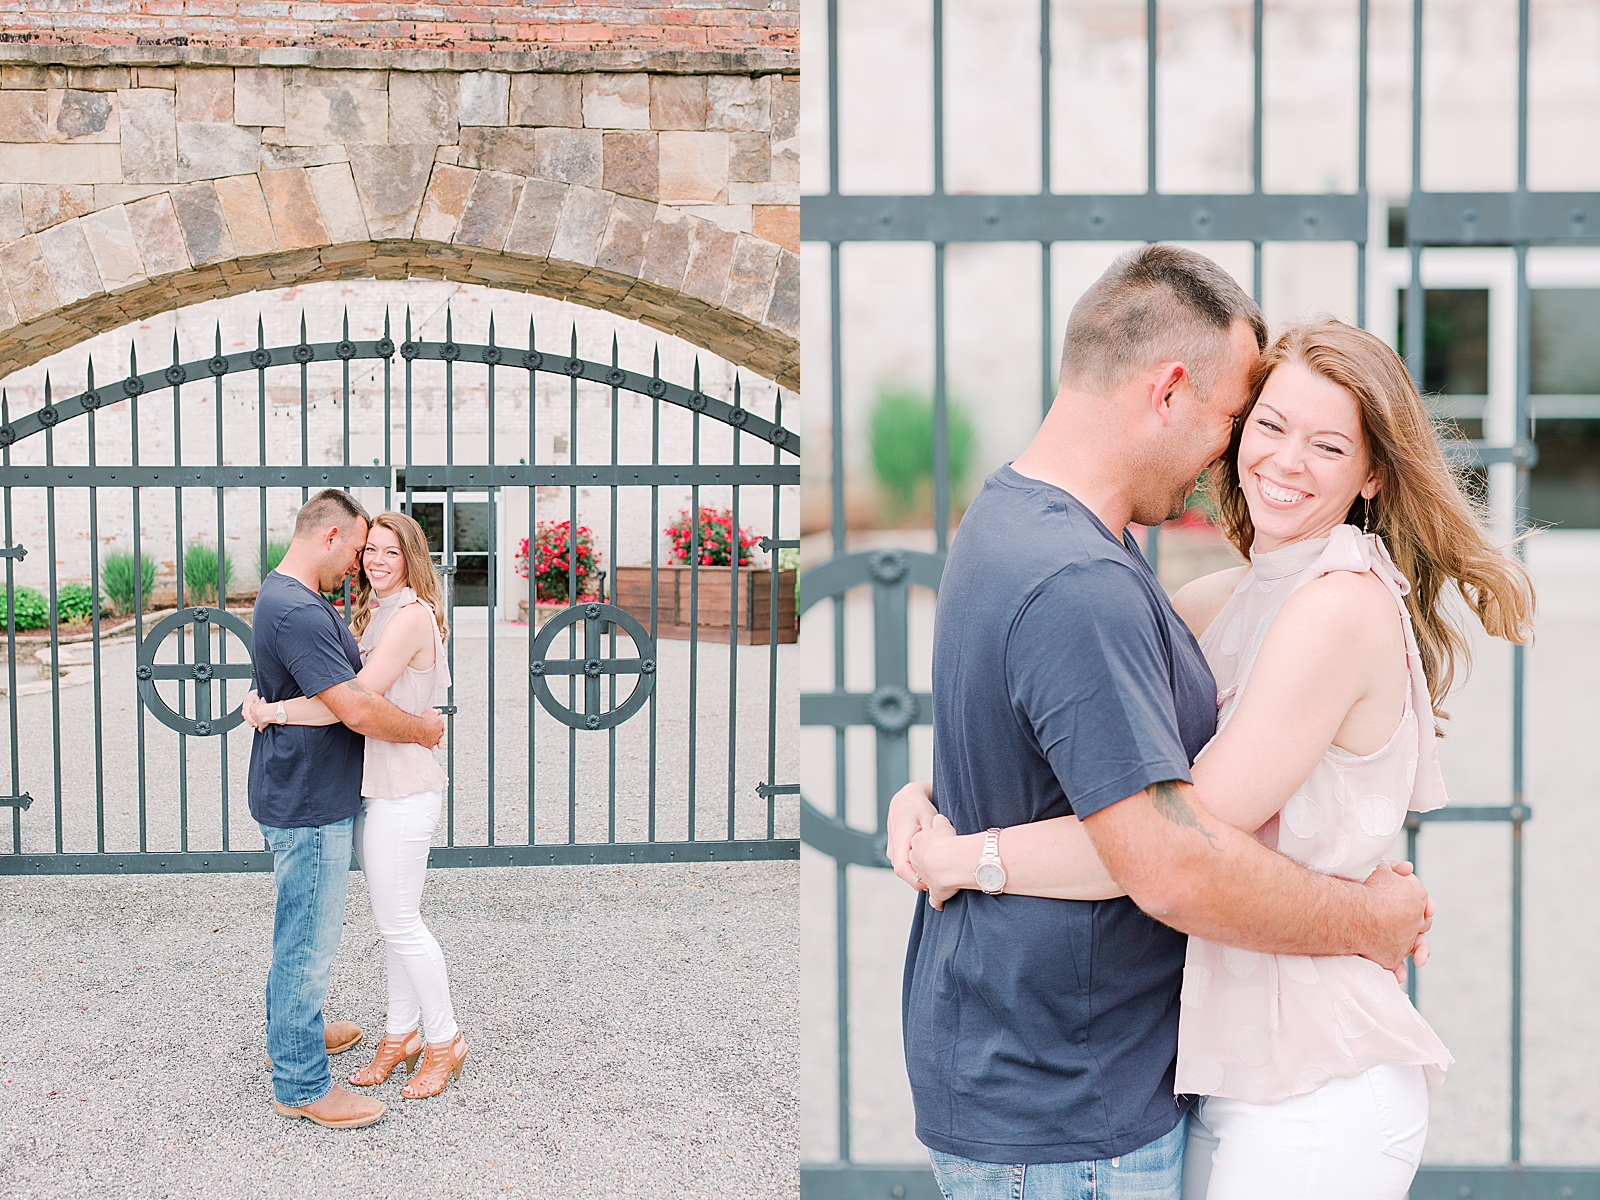 Hackney Warehouse Engagement Session Couple hugging in front of iron gate Photos